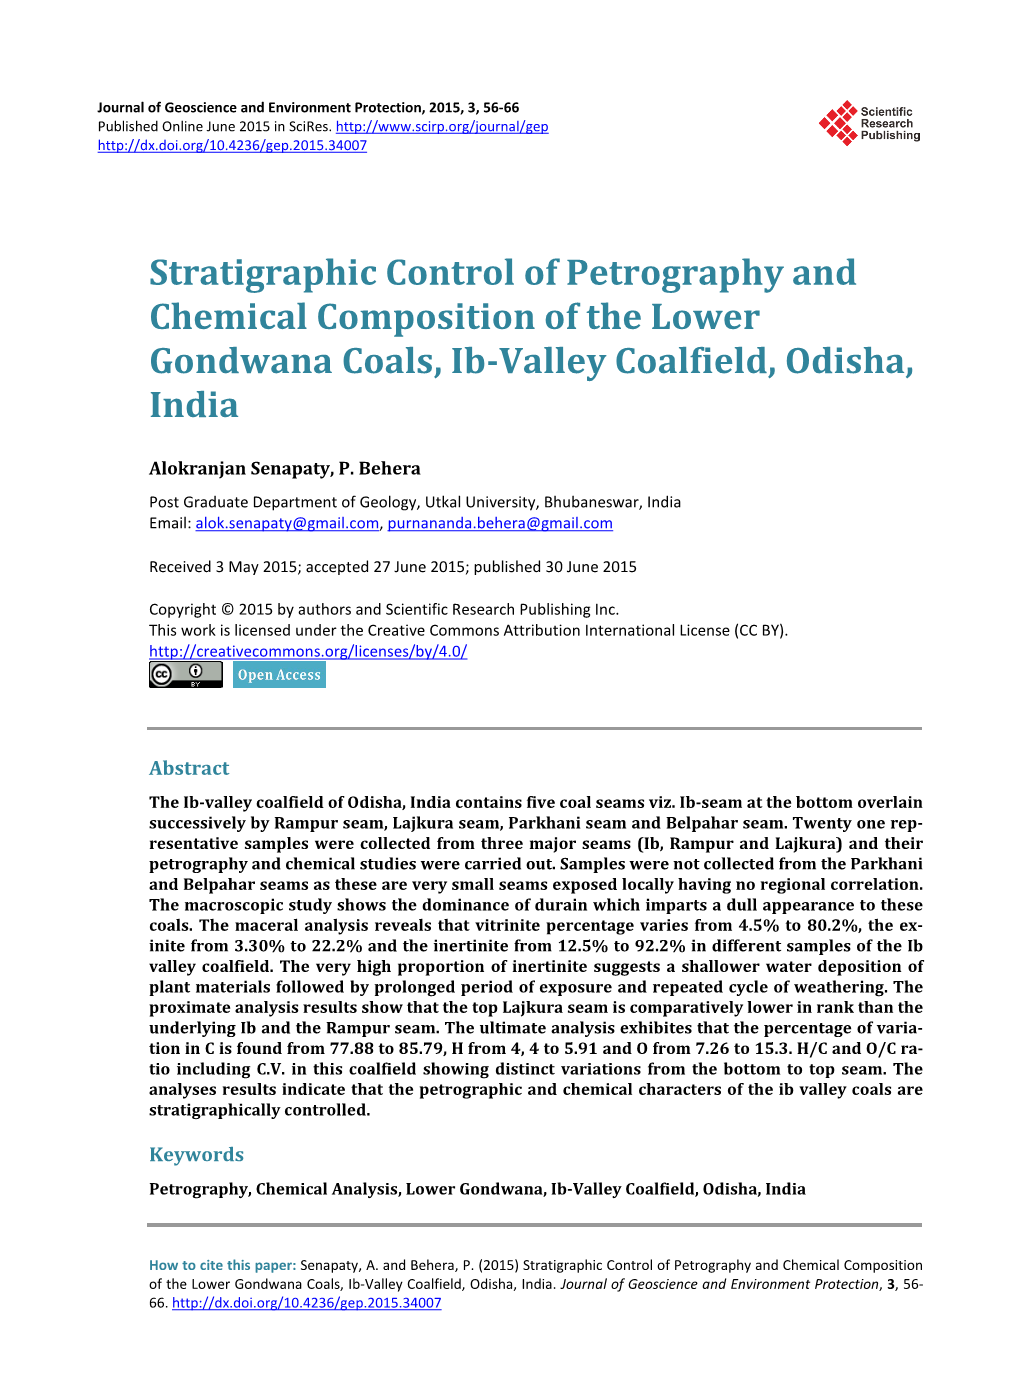 Stratigraphic Control of Petrography and Chemical Composition of the Lower Gondwana Coals, Ib-Valley Coalfield, Odisha, India